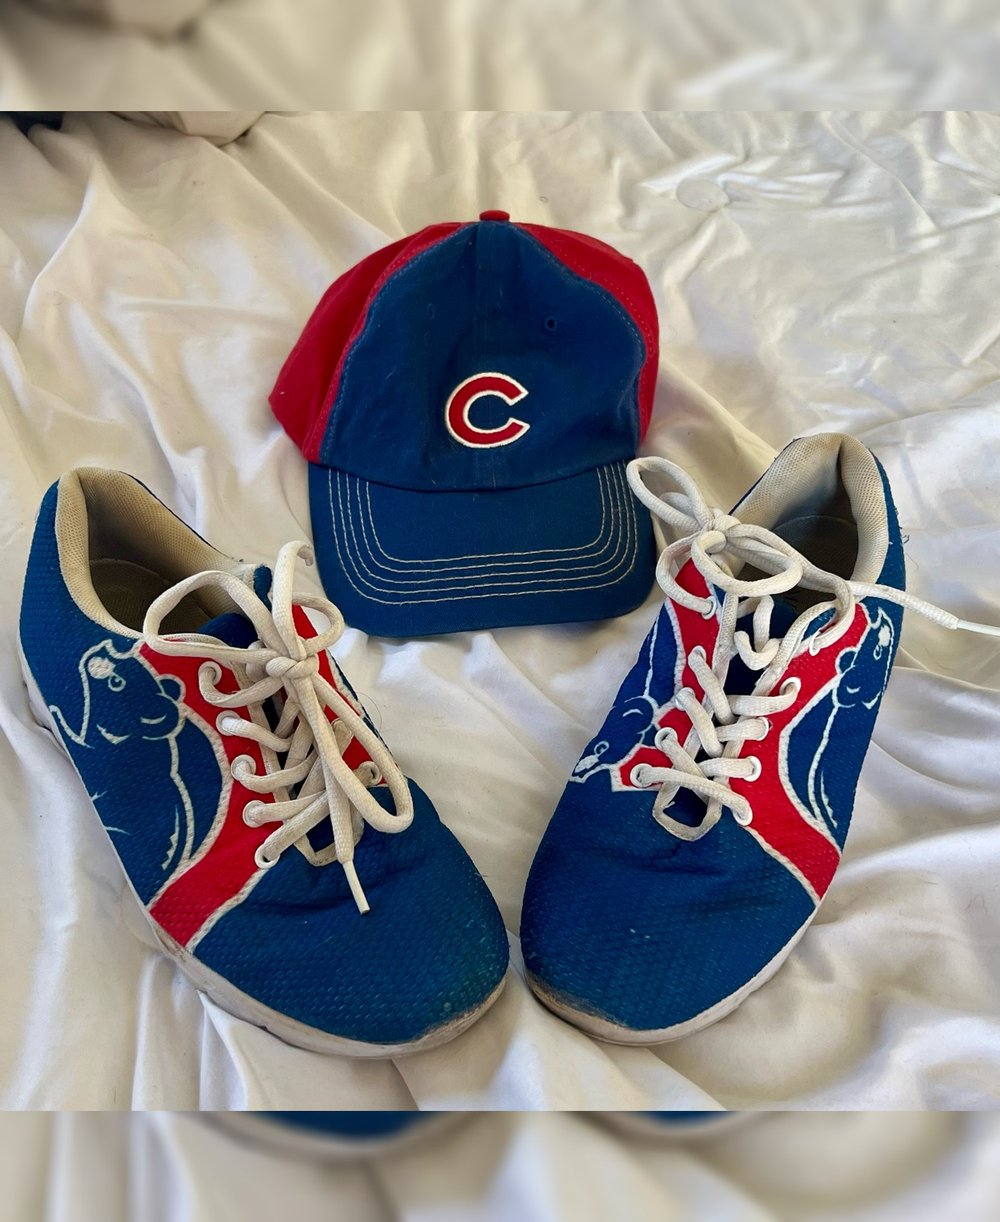 Chicago Cubs Baseball Cap & Sneakers Combo + Free Signed 8x10